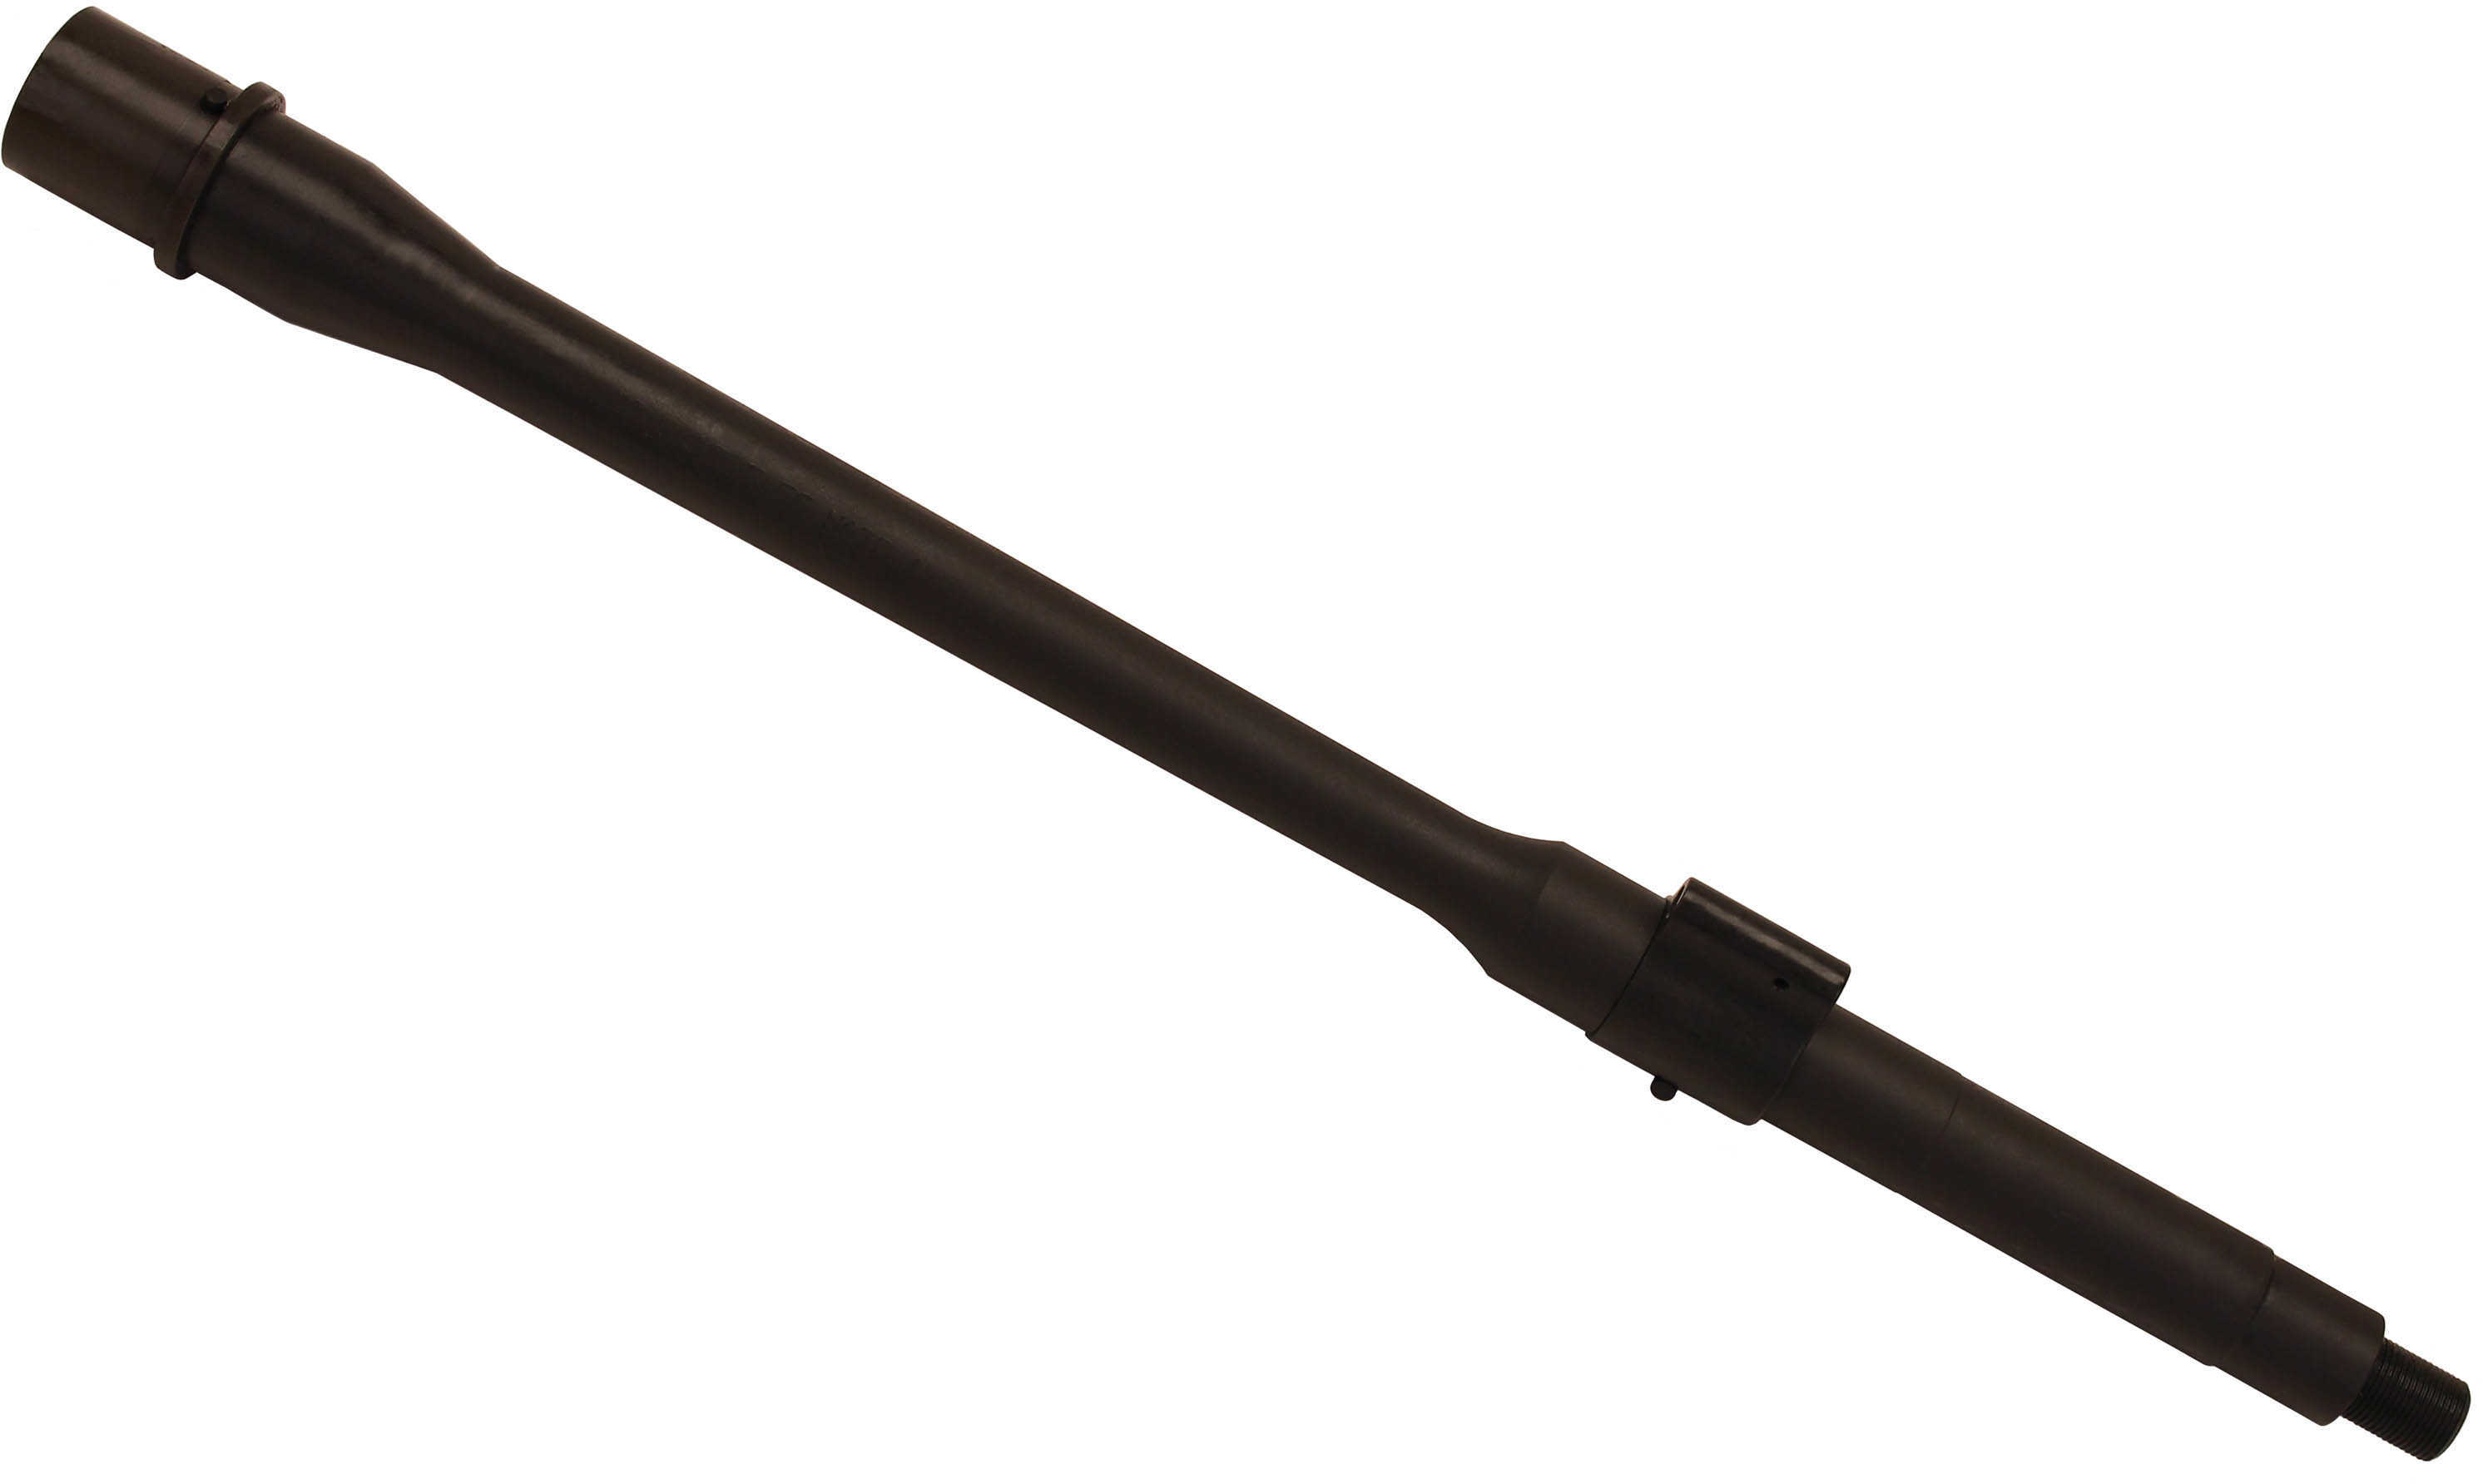 Daniel Defense Barrel Assembly CMV CHF 5.56/1:7 14.50" Government MID with LPG Md: 07-077-07308